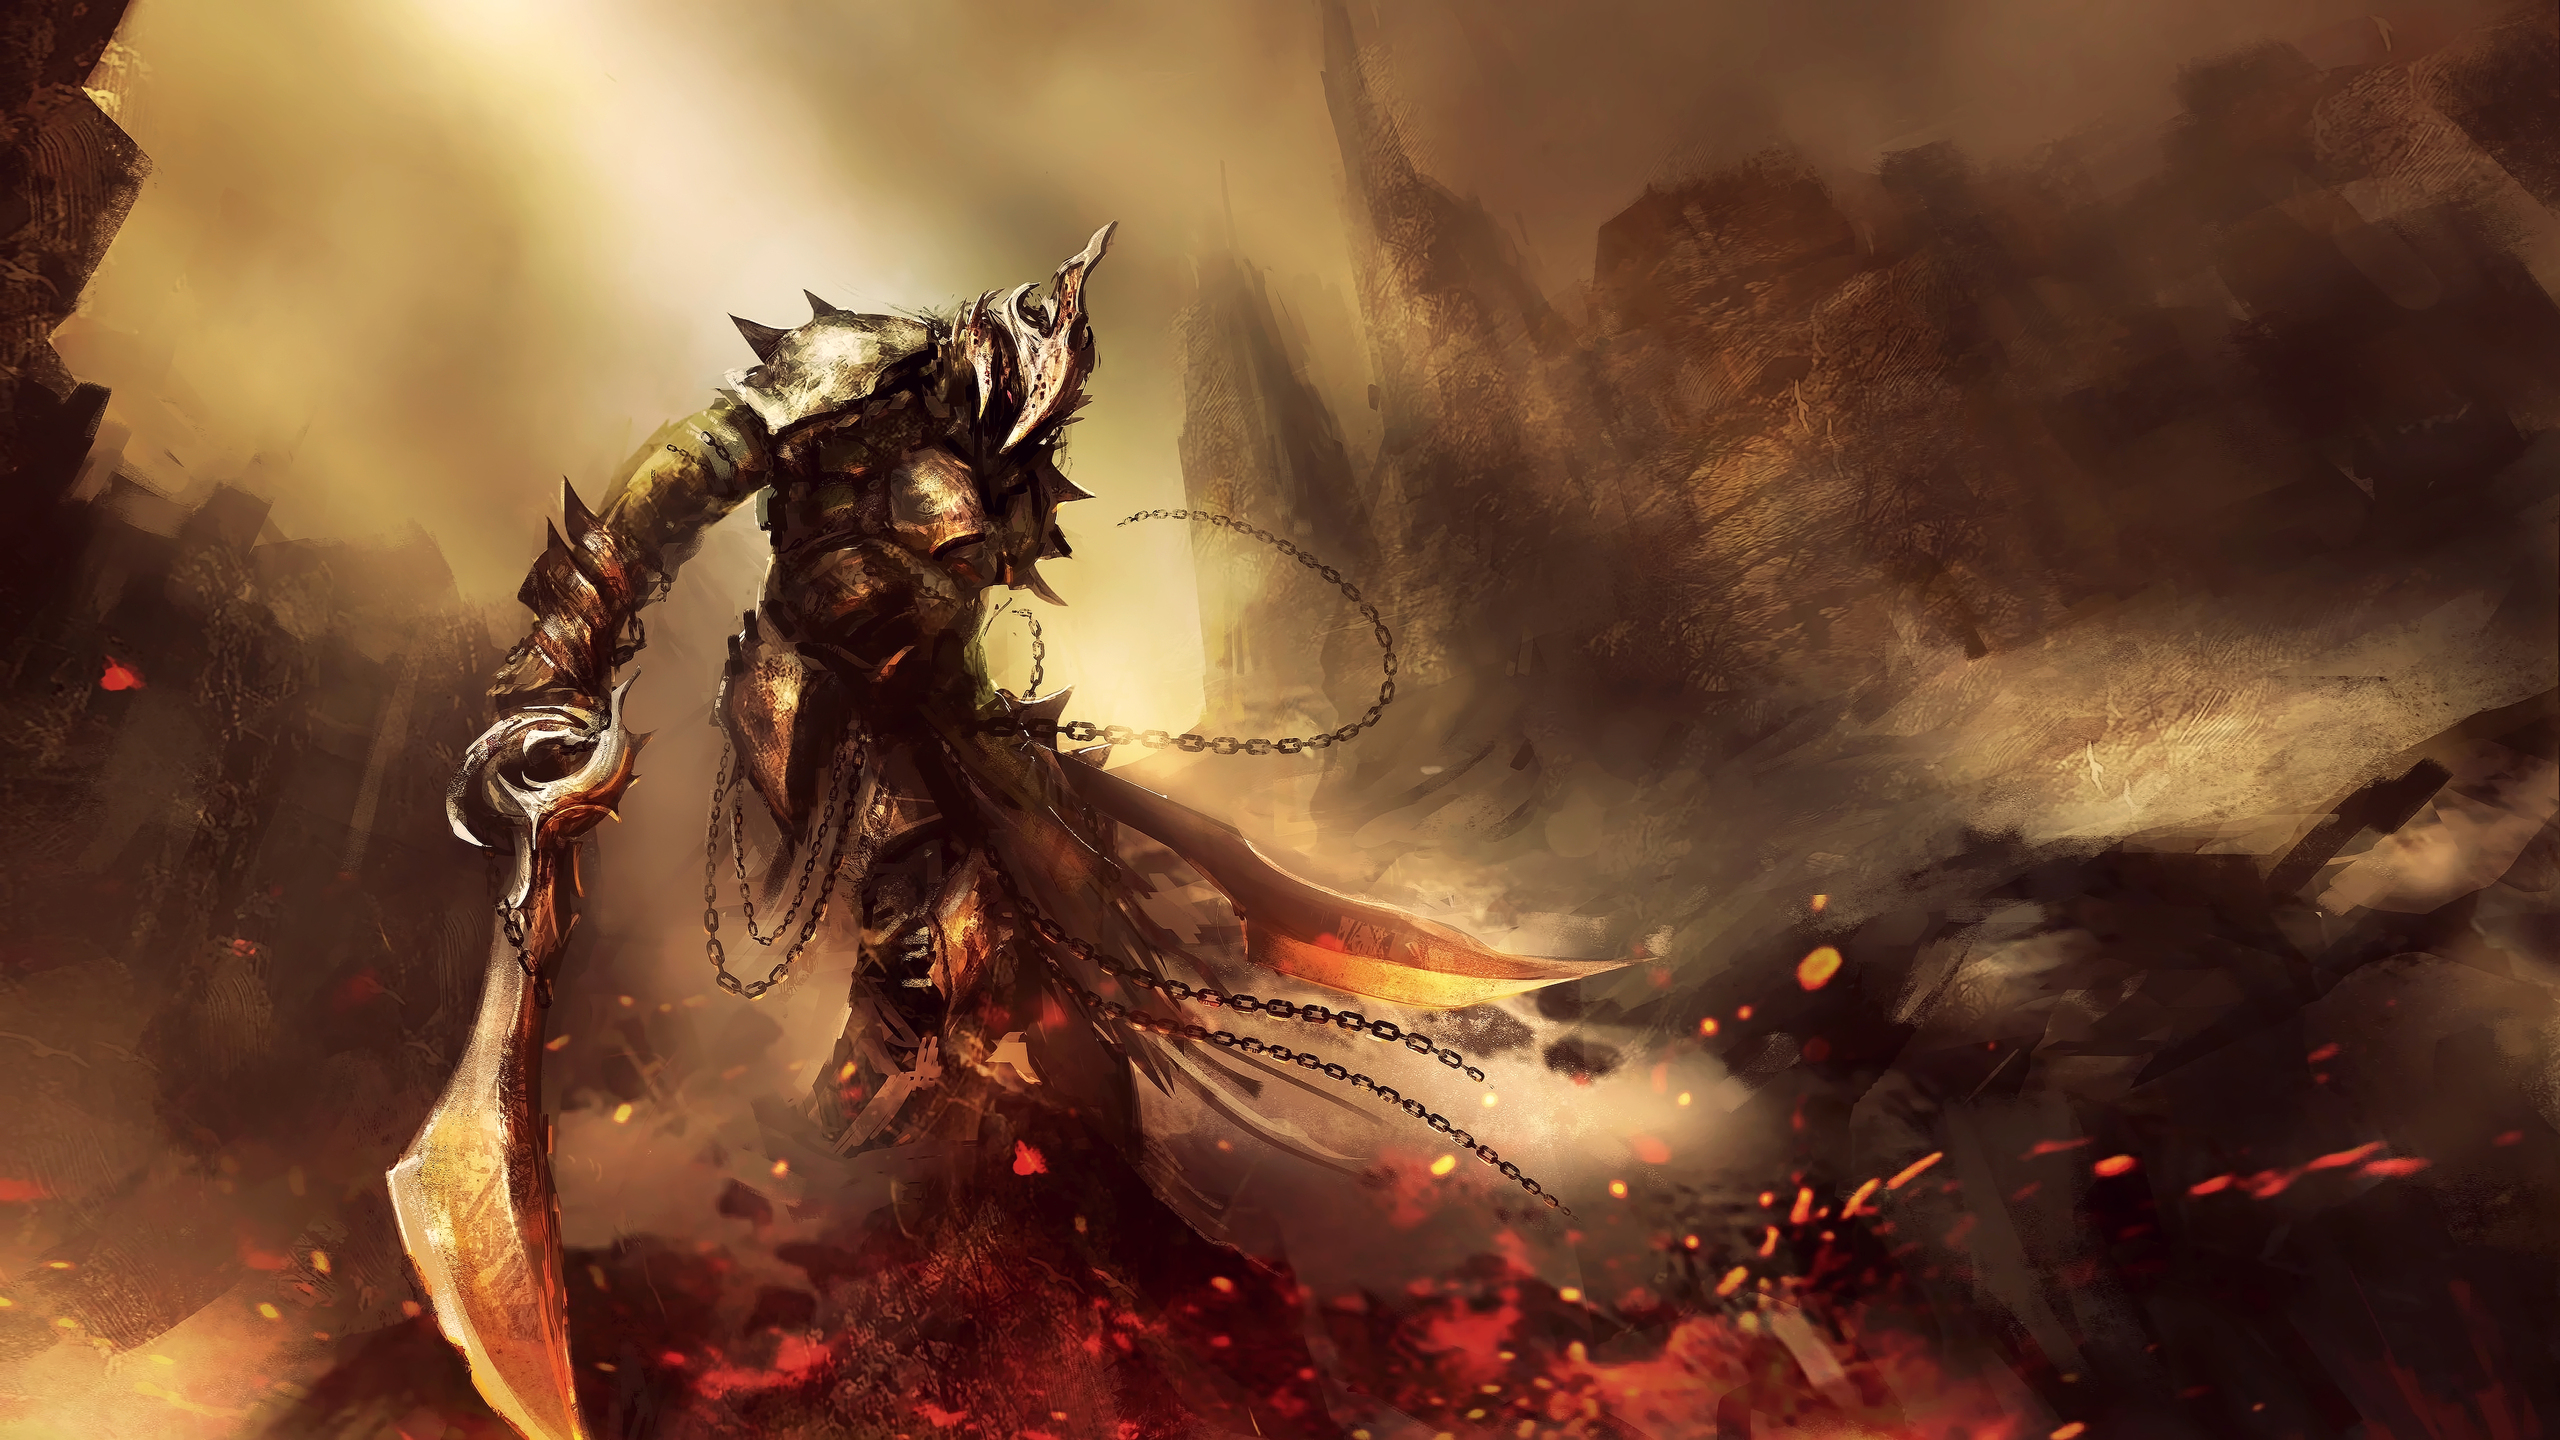 Warrior Fantasy Art 4k 1440P Resolution HD 4k Wallpaper, Image, Background, Photo and Picture